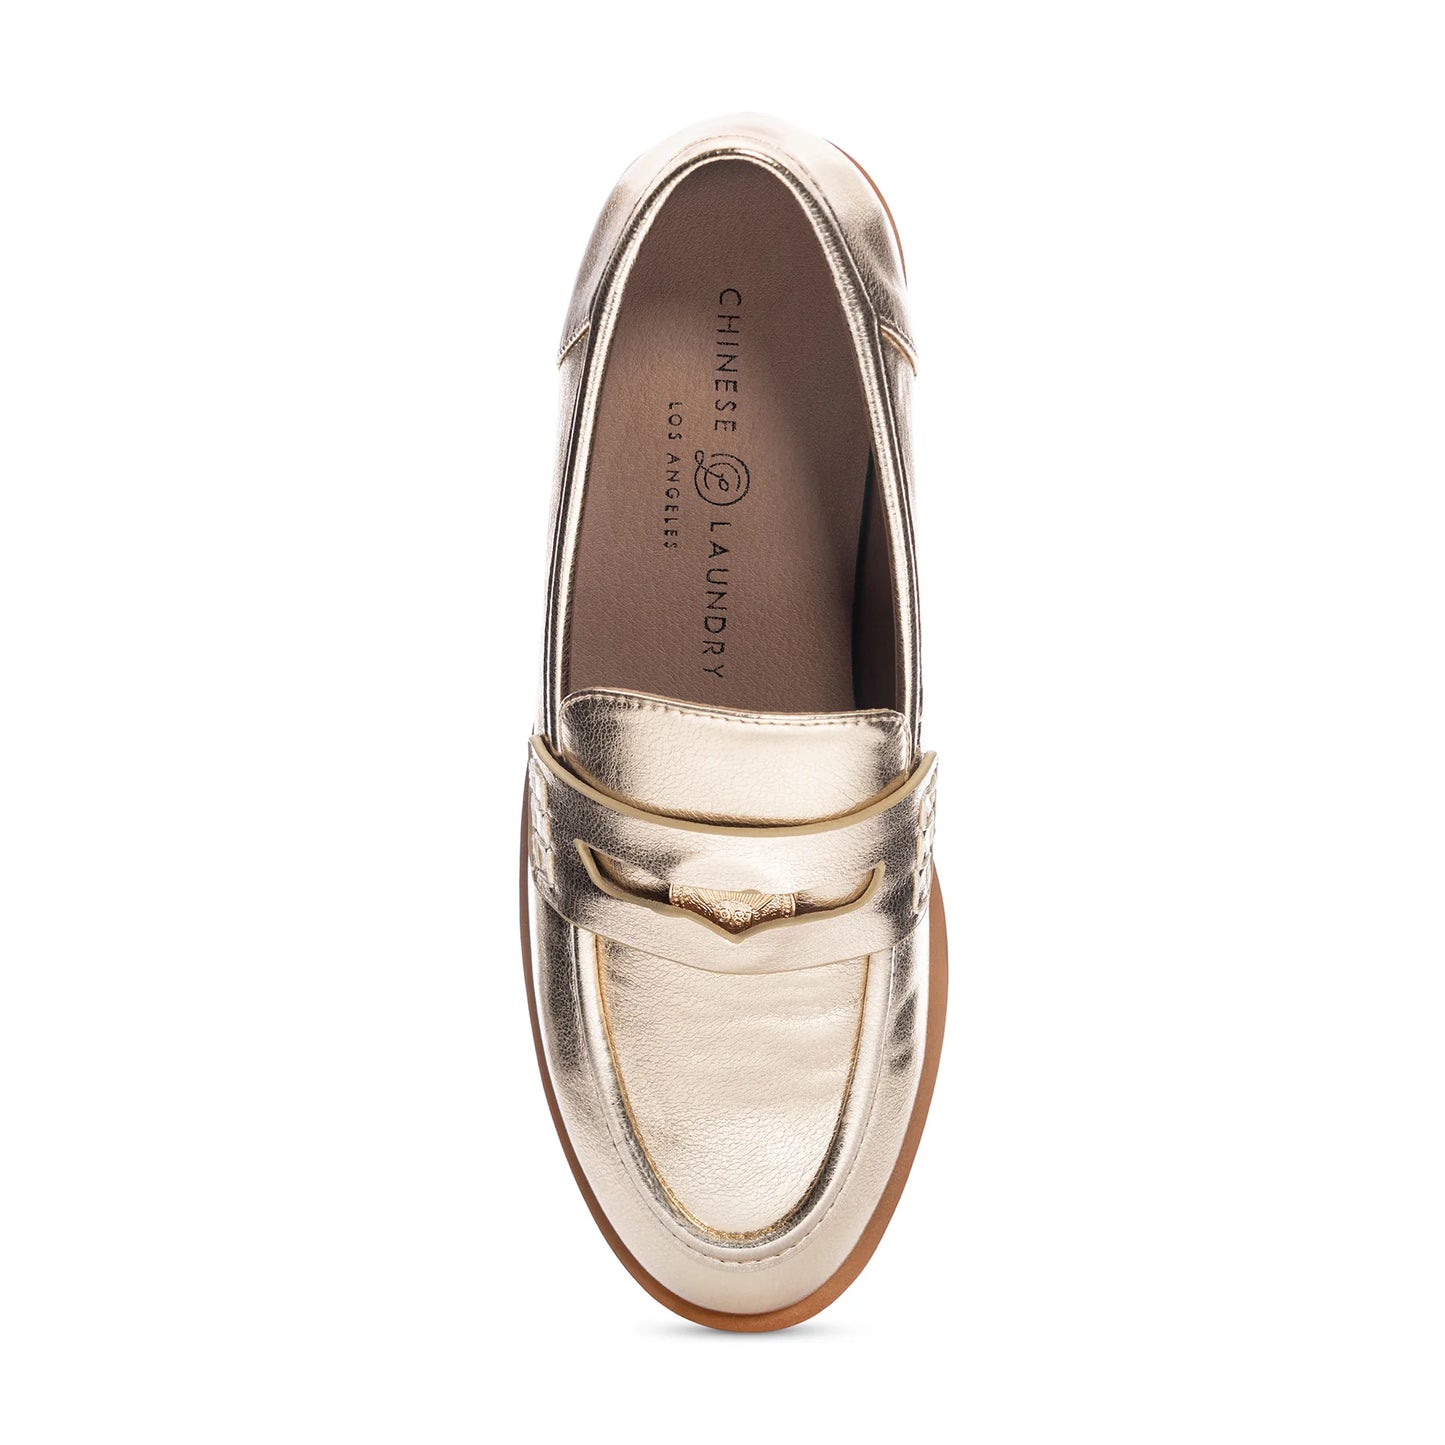 Chinese Laundry Porter Metallic Causal Loafer